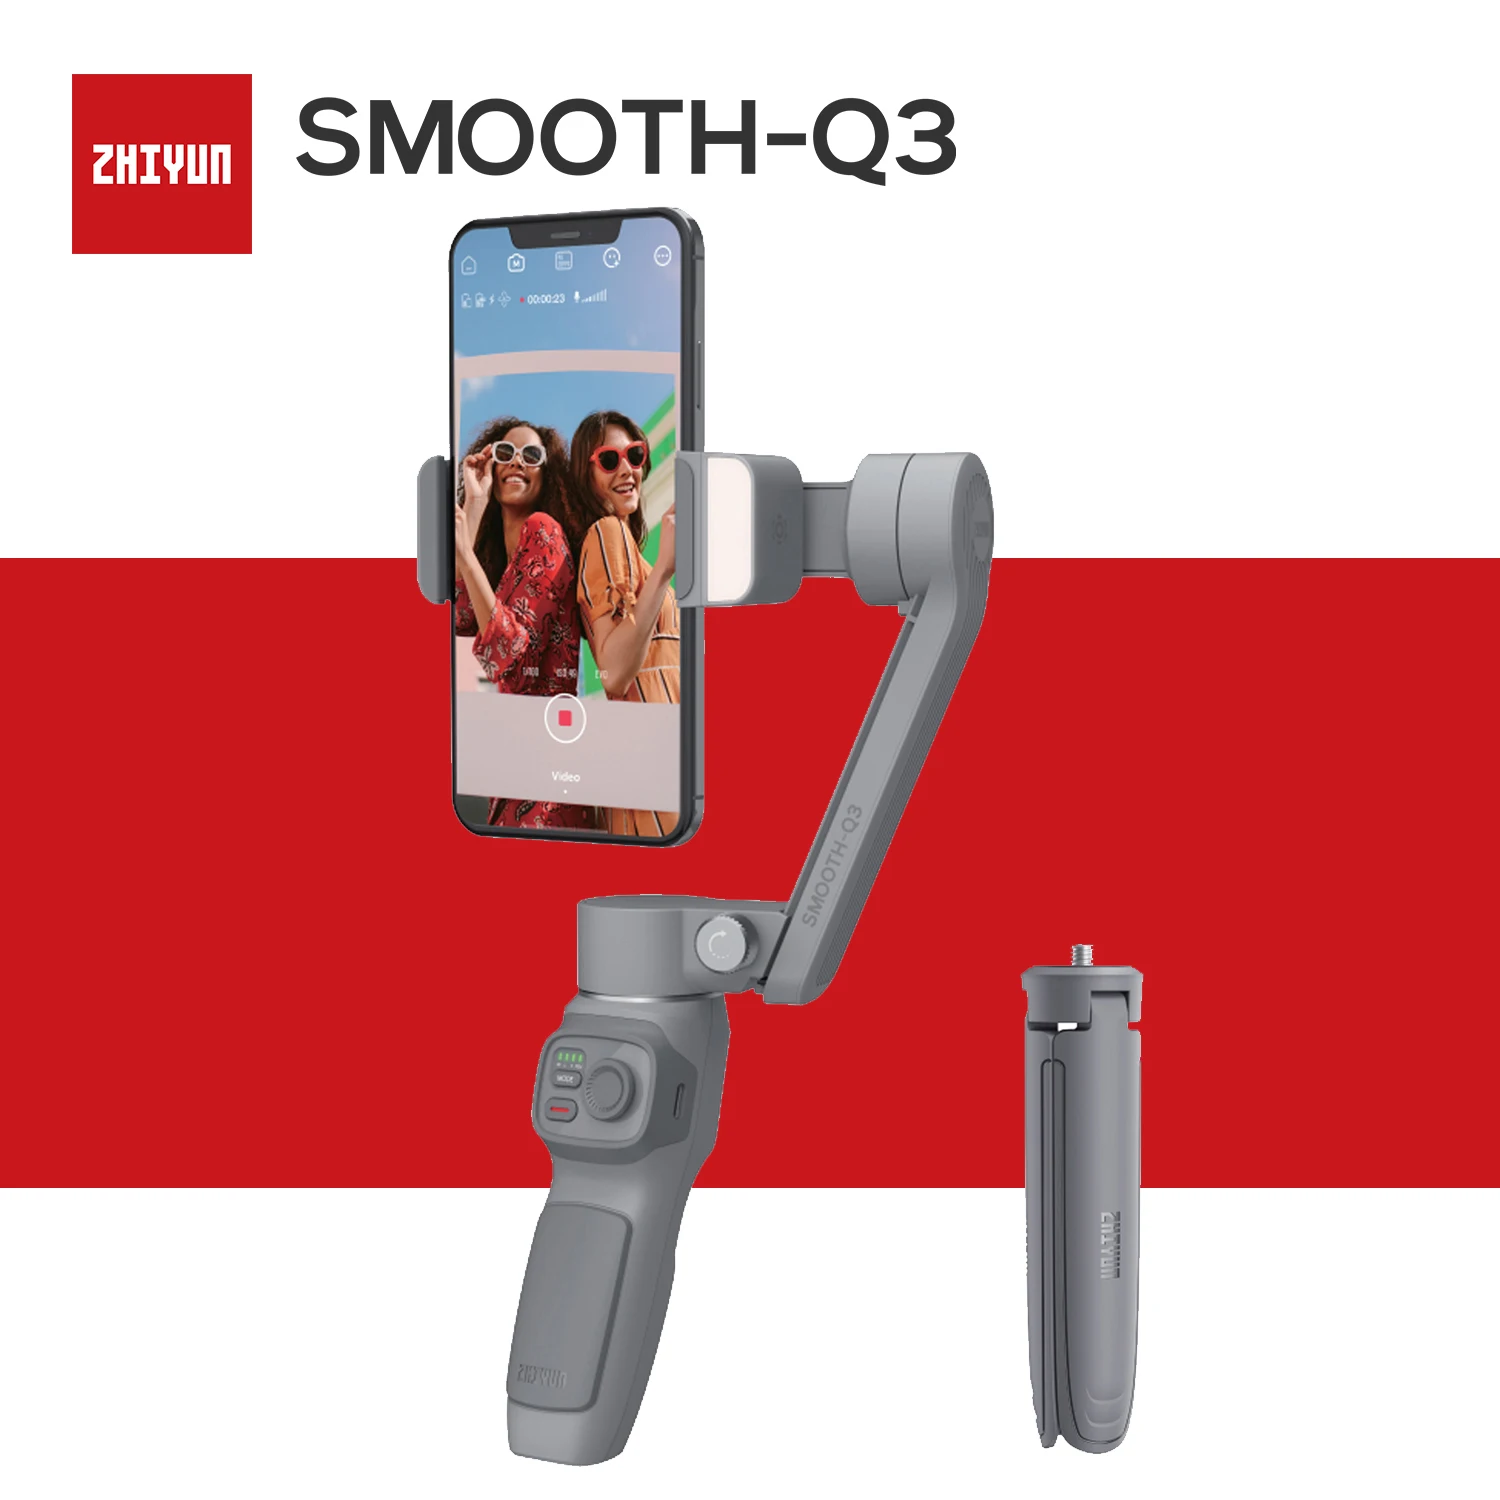 ZHIYUN Smooth Q3Phone gimbal foldable handheld stabilizer for smartphone  with fast delivery free shipping- AliExpress